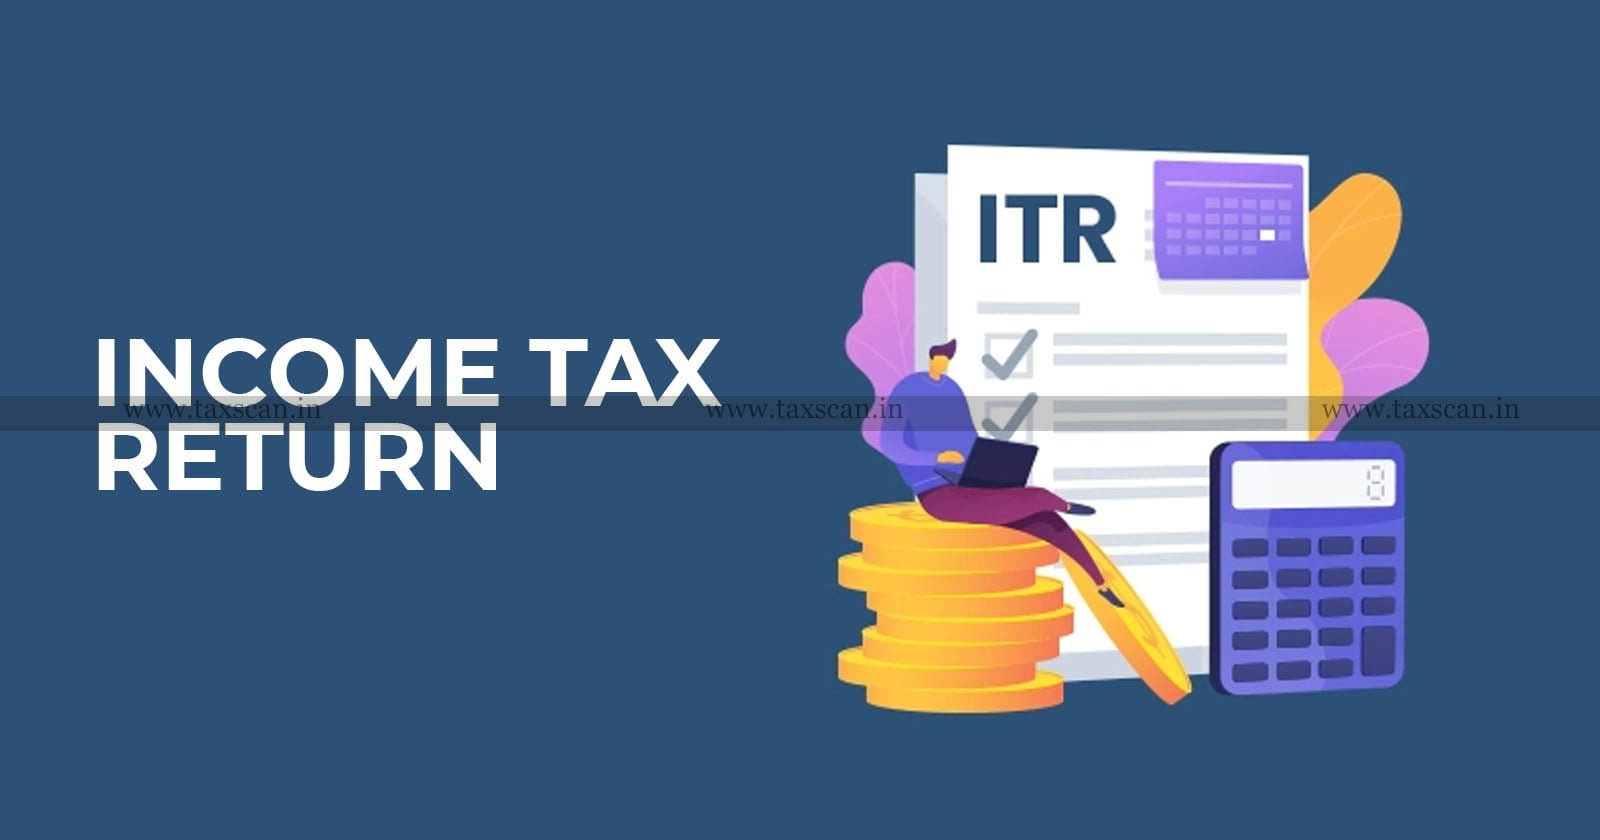 Failure to note disclosures in ITR prior to issuance of notice - Income Tax Act - Delhi HC quashes income tax notice - TAXSCAN